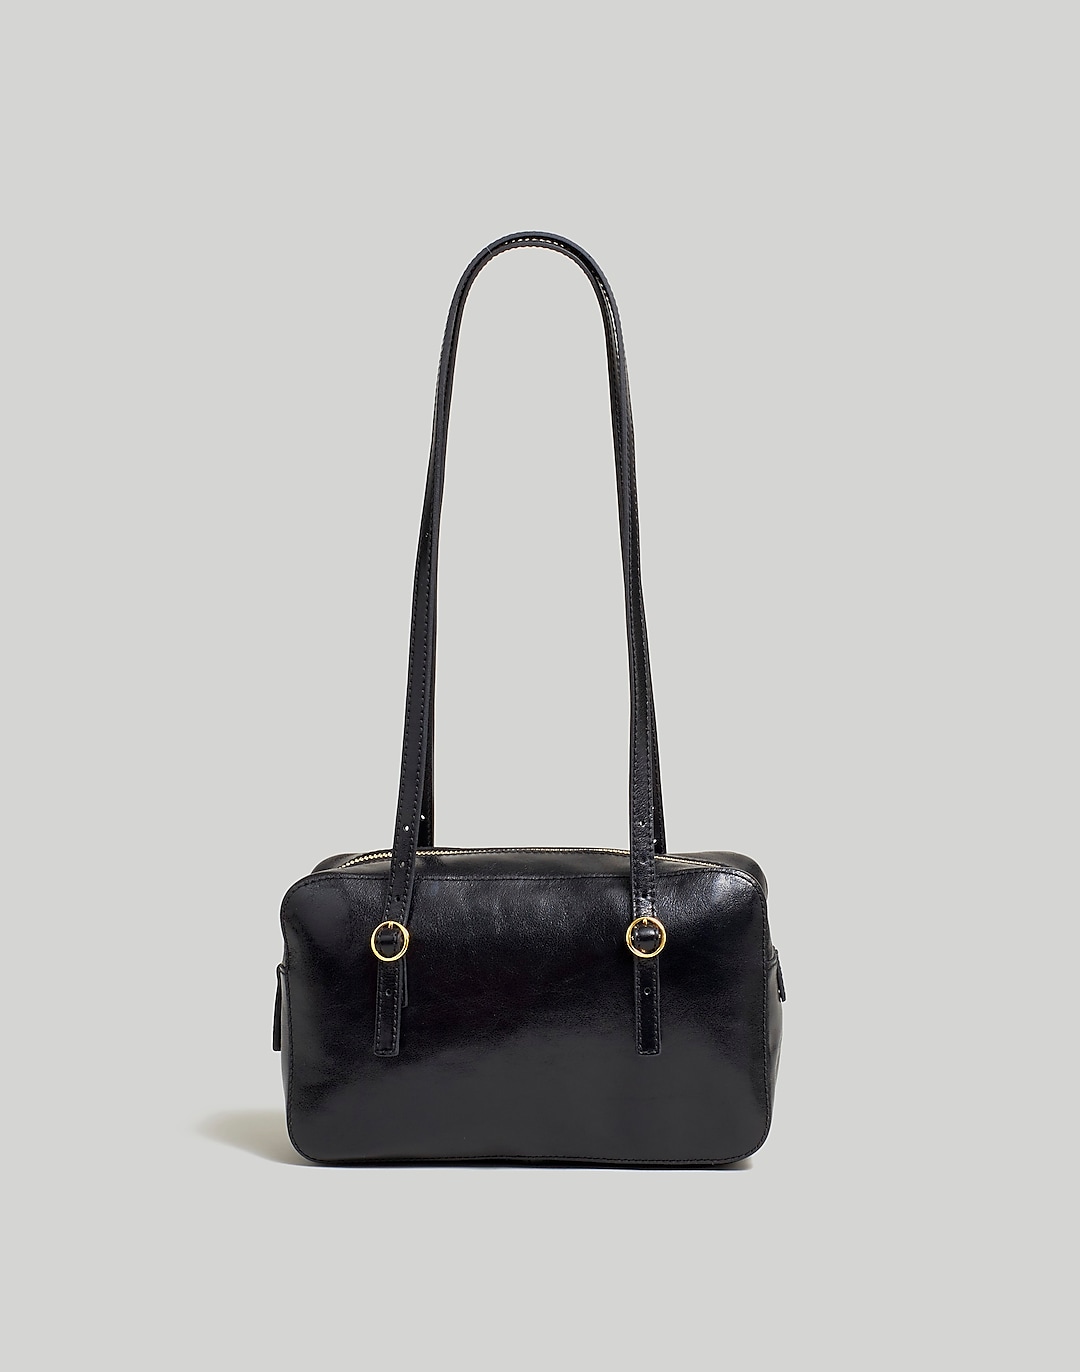 The Buckle-Strap Rectangular Bag in Patent Leather | Madewell